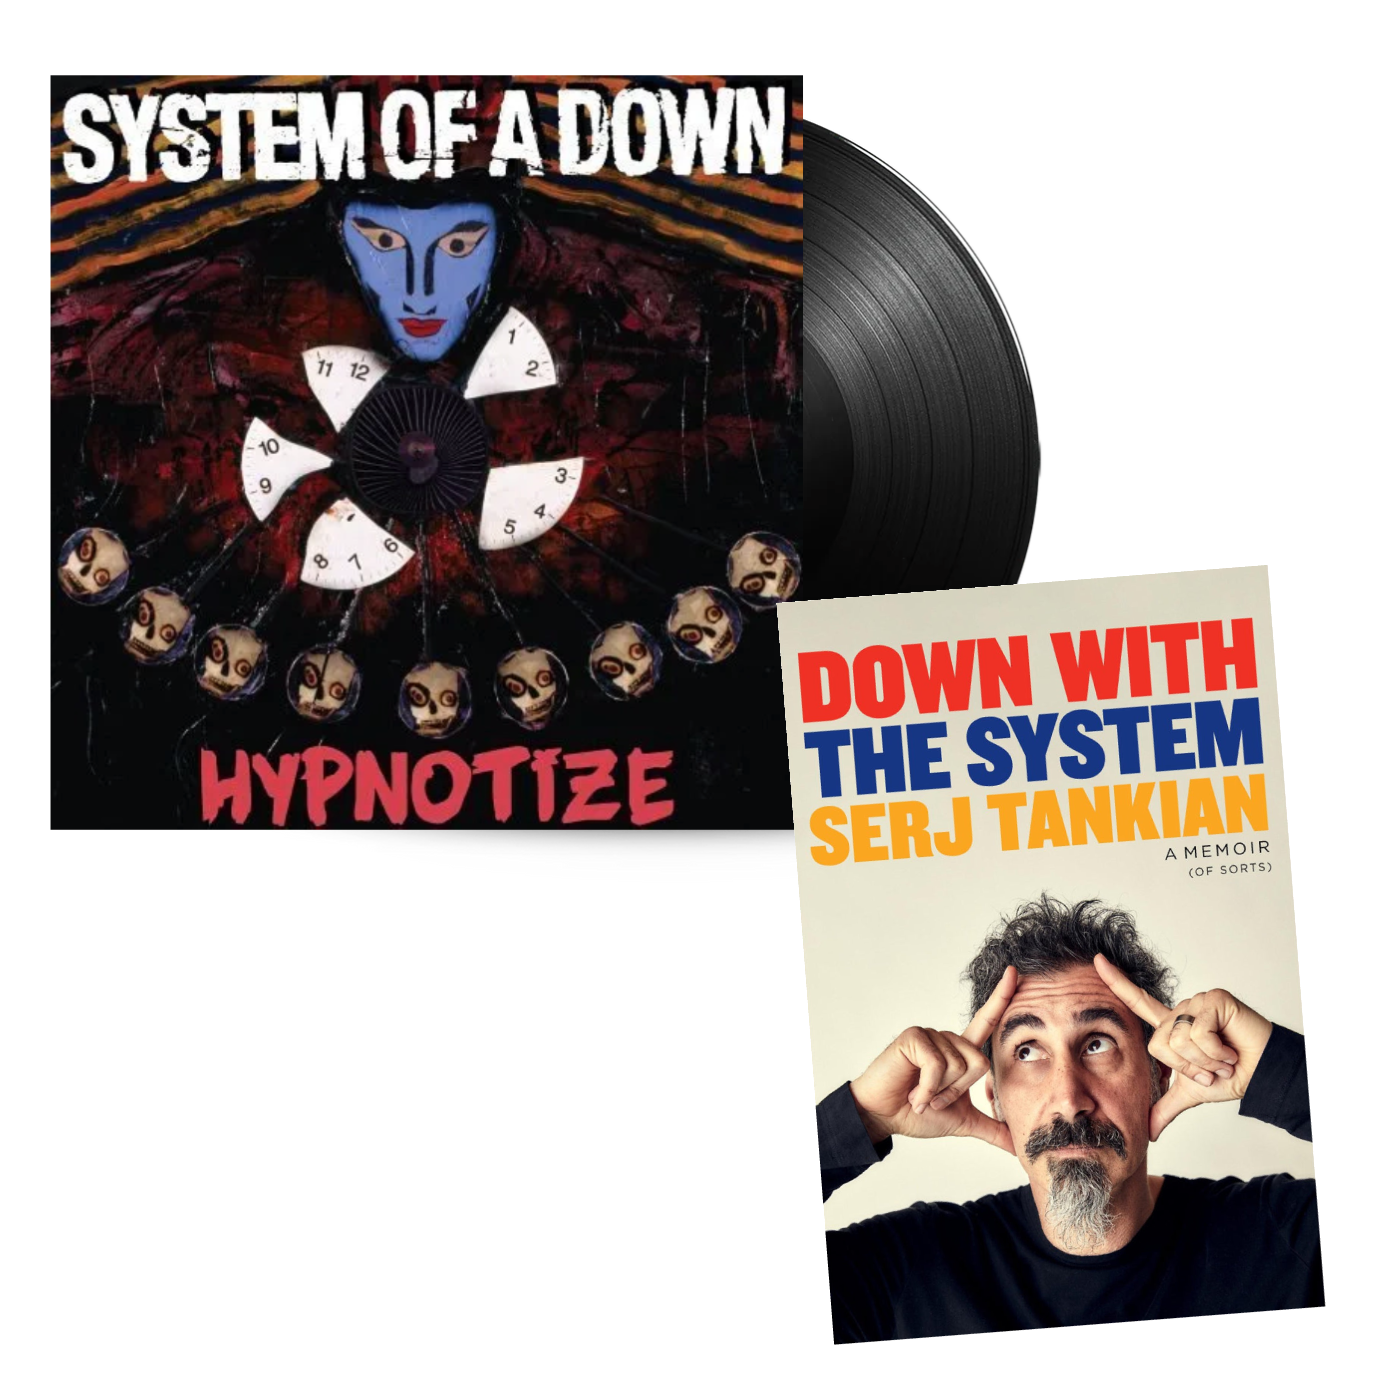 Hypnotize Vinyl LP & Signed Down With The System Book